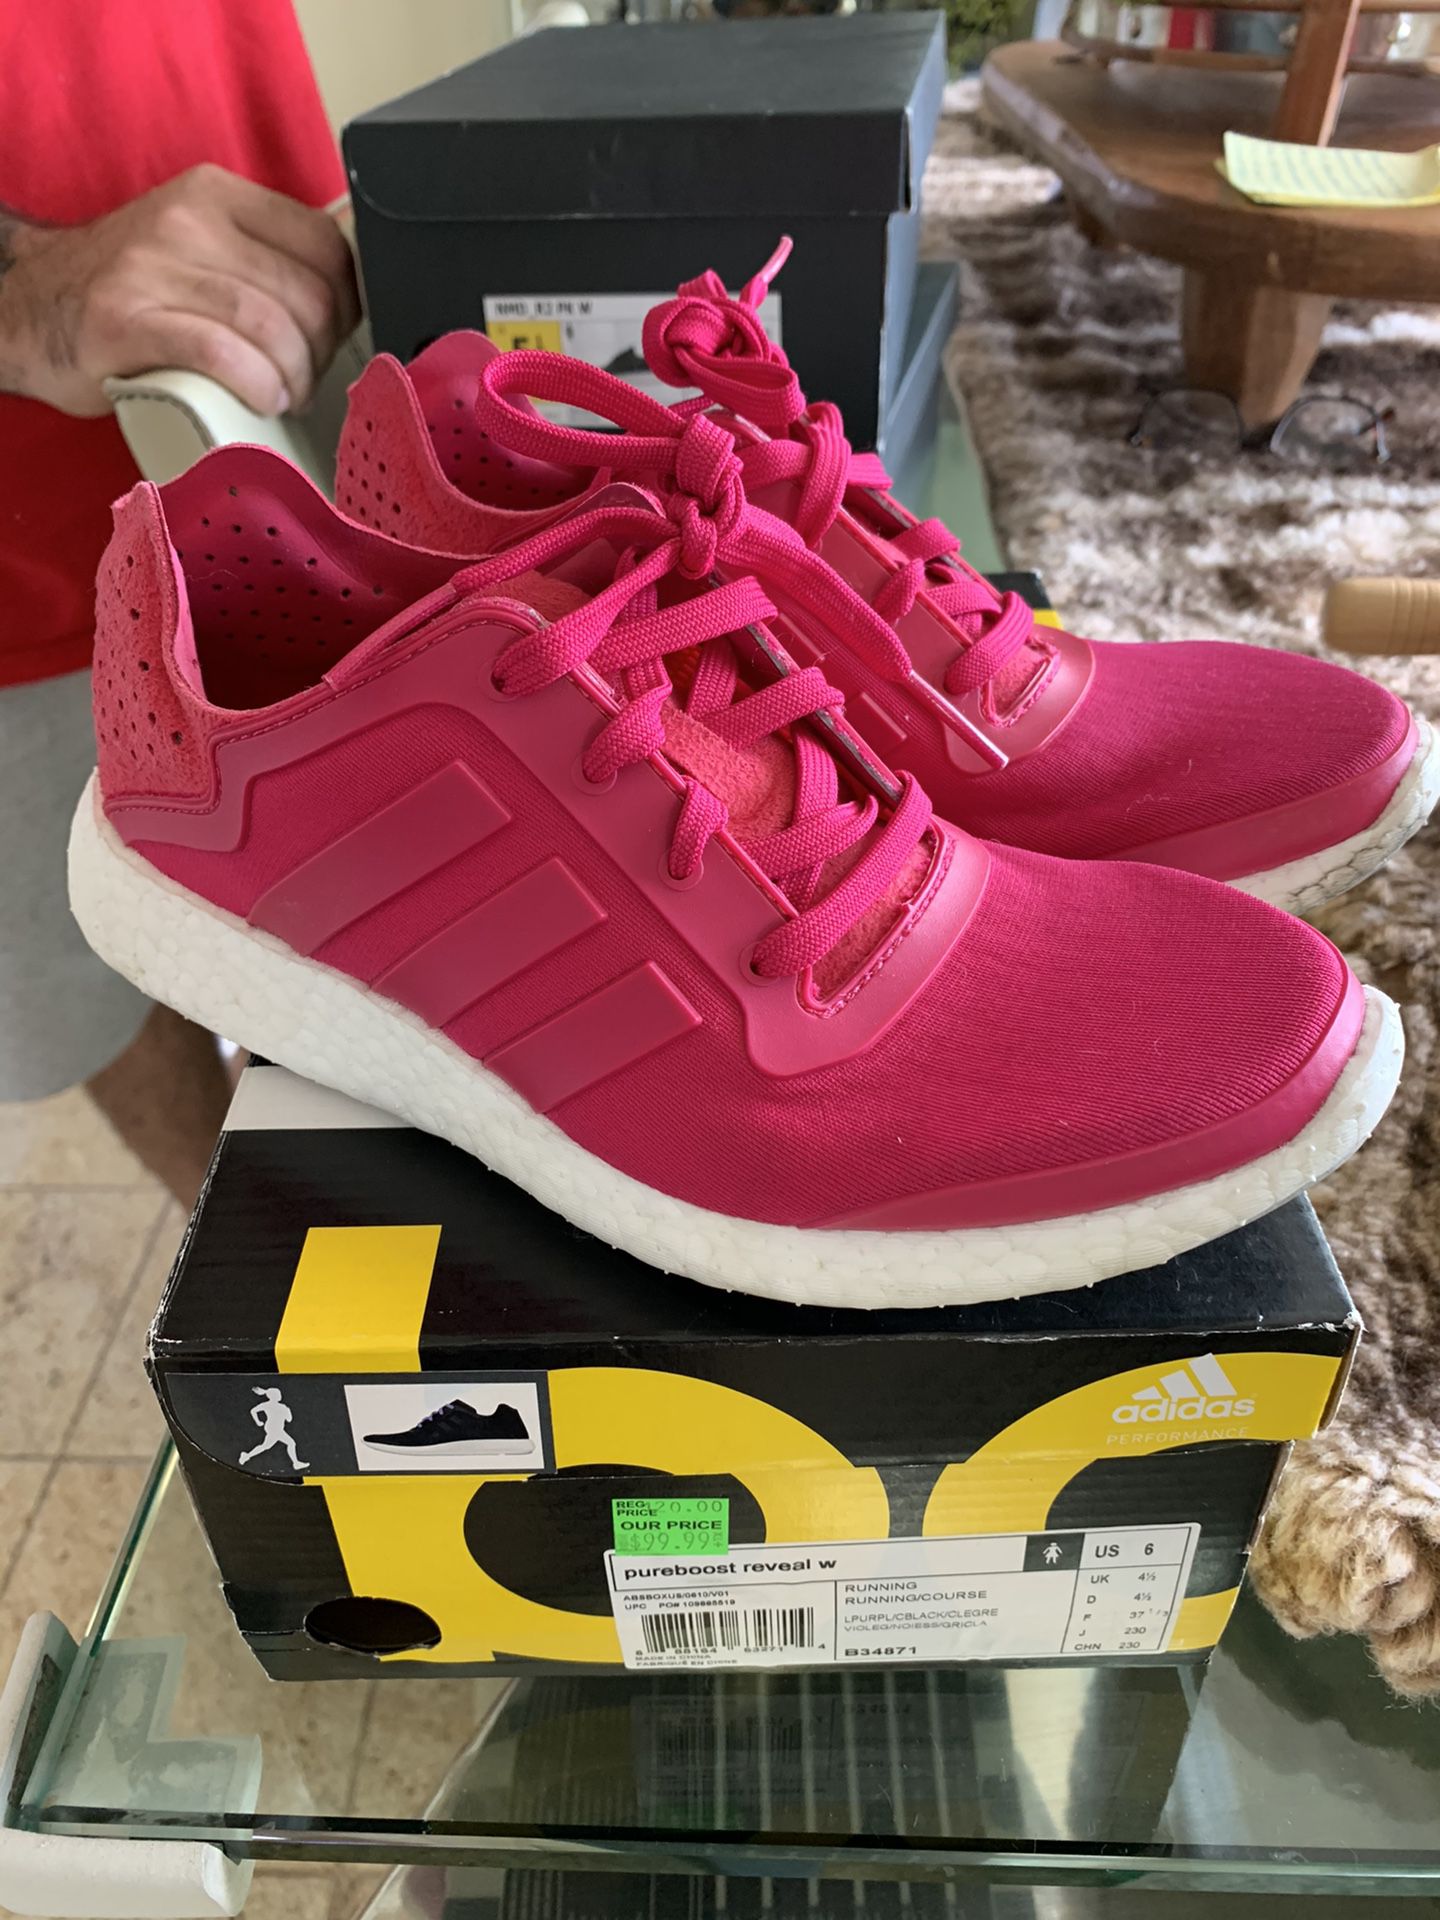 Adidas boost women’s shoes size 6